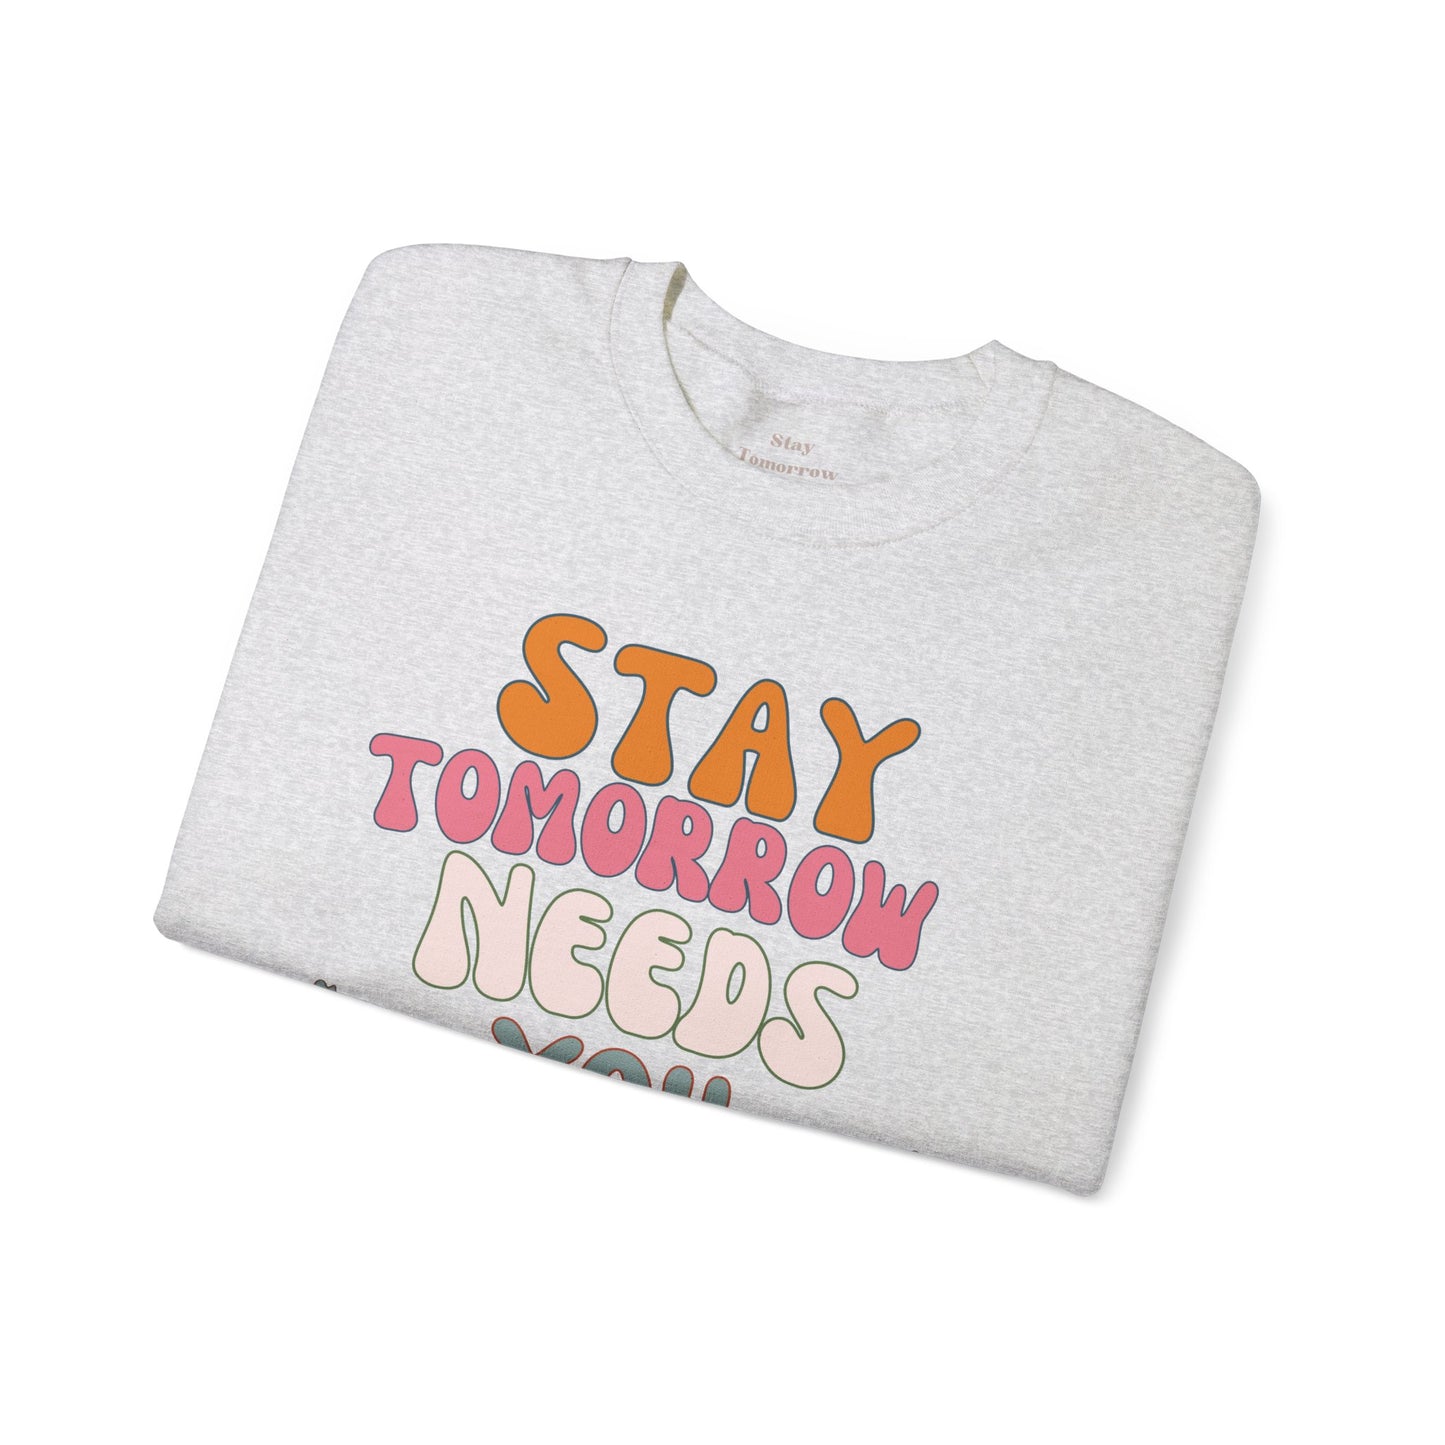 Retro Boho Summer Stay Tomorrow Needs You Sweatshirt Mental Health Awareness Suicide Prevention Mothers Day Fathers Day Gift Veterans Support Military Gift - Stay Tomorrow Needs You Retro Boho Summer Stay Tomorrow Needs You Sweatshirt Mental Health Awareness Suicide Prevention Mothers Day Fathers Day Gift Veterans Support Military Gift